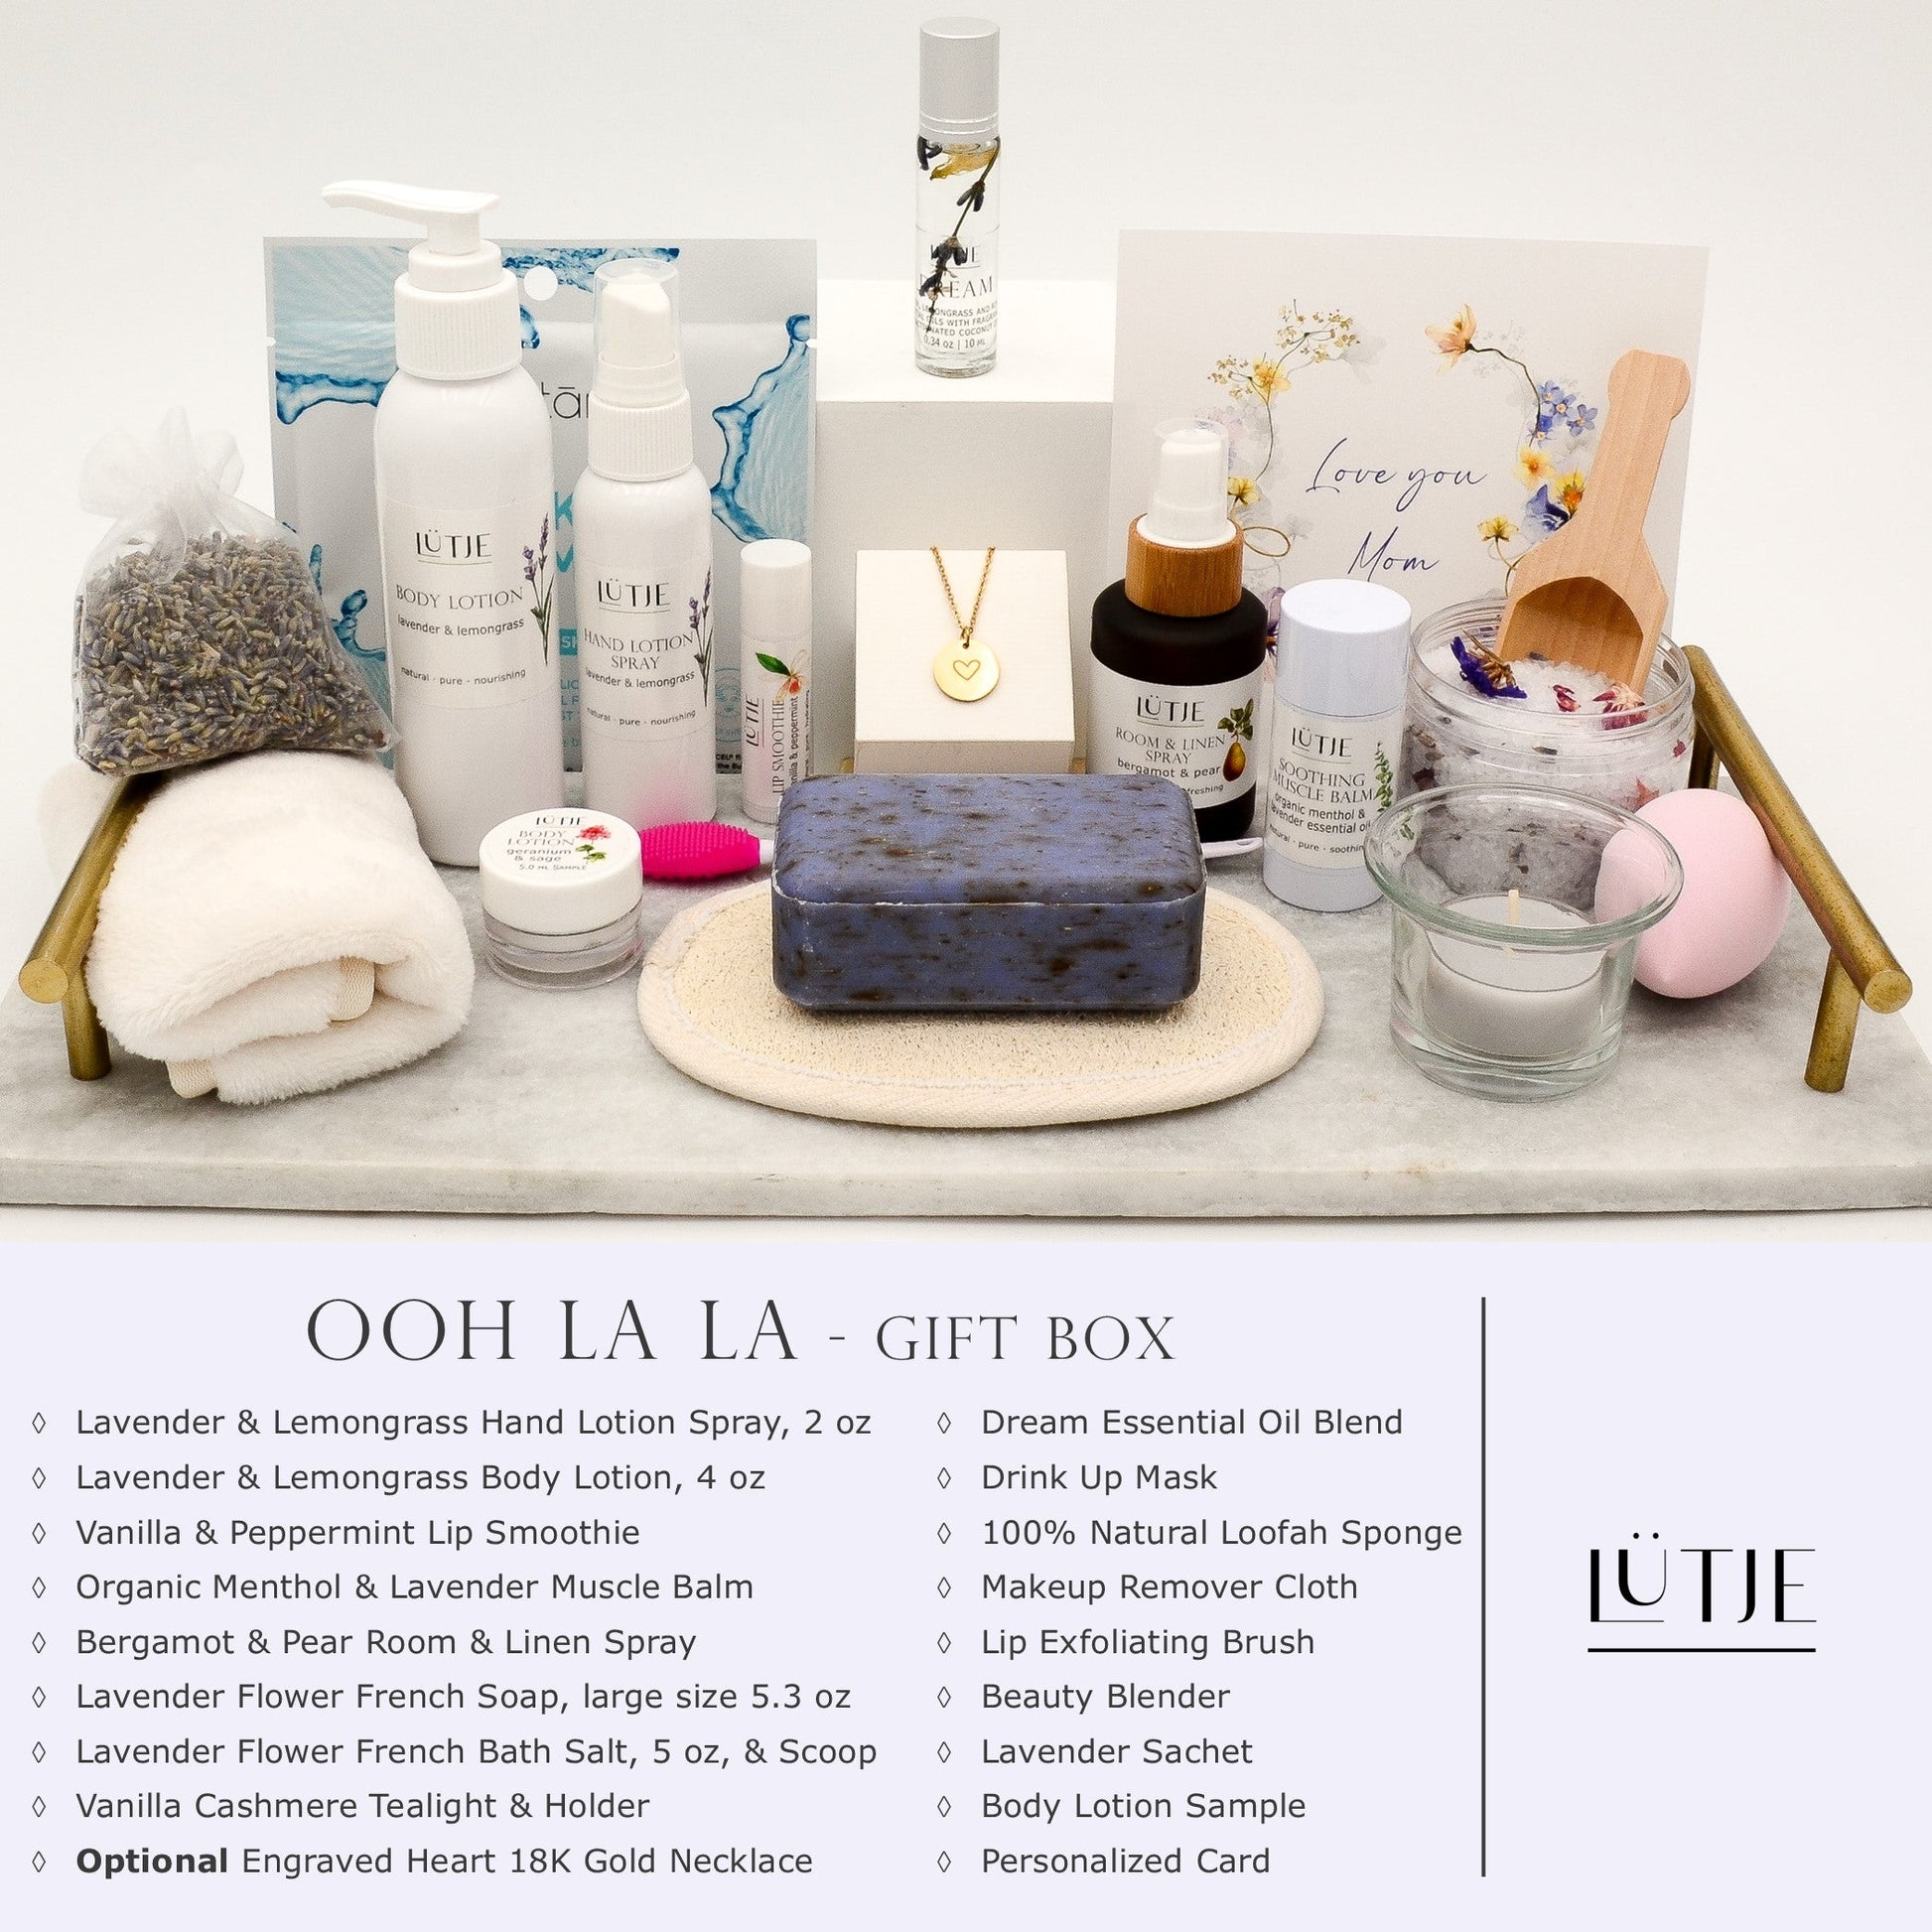 Ooh La La Gift Box for women, wife, daughter, BFF, sister, mom, or grandma, includes Lavender & Lemongrass hand lotion spray and body lotion, essential oil, lip balm, soothing muscle balm, Bergamot & Pear room & linen spray, French soap, French bath salts, hydrating face mask, other bath, spa and self-care items, and optional 18K gold-plated necklace with engraved heart.